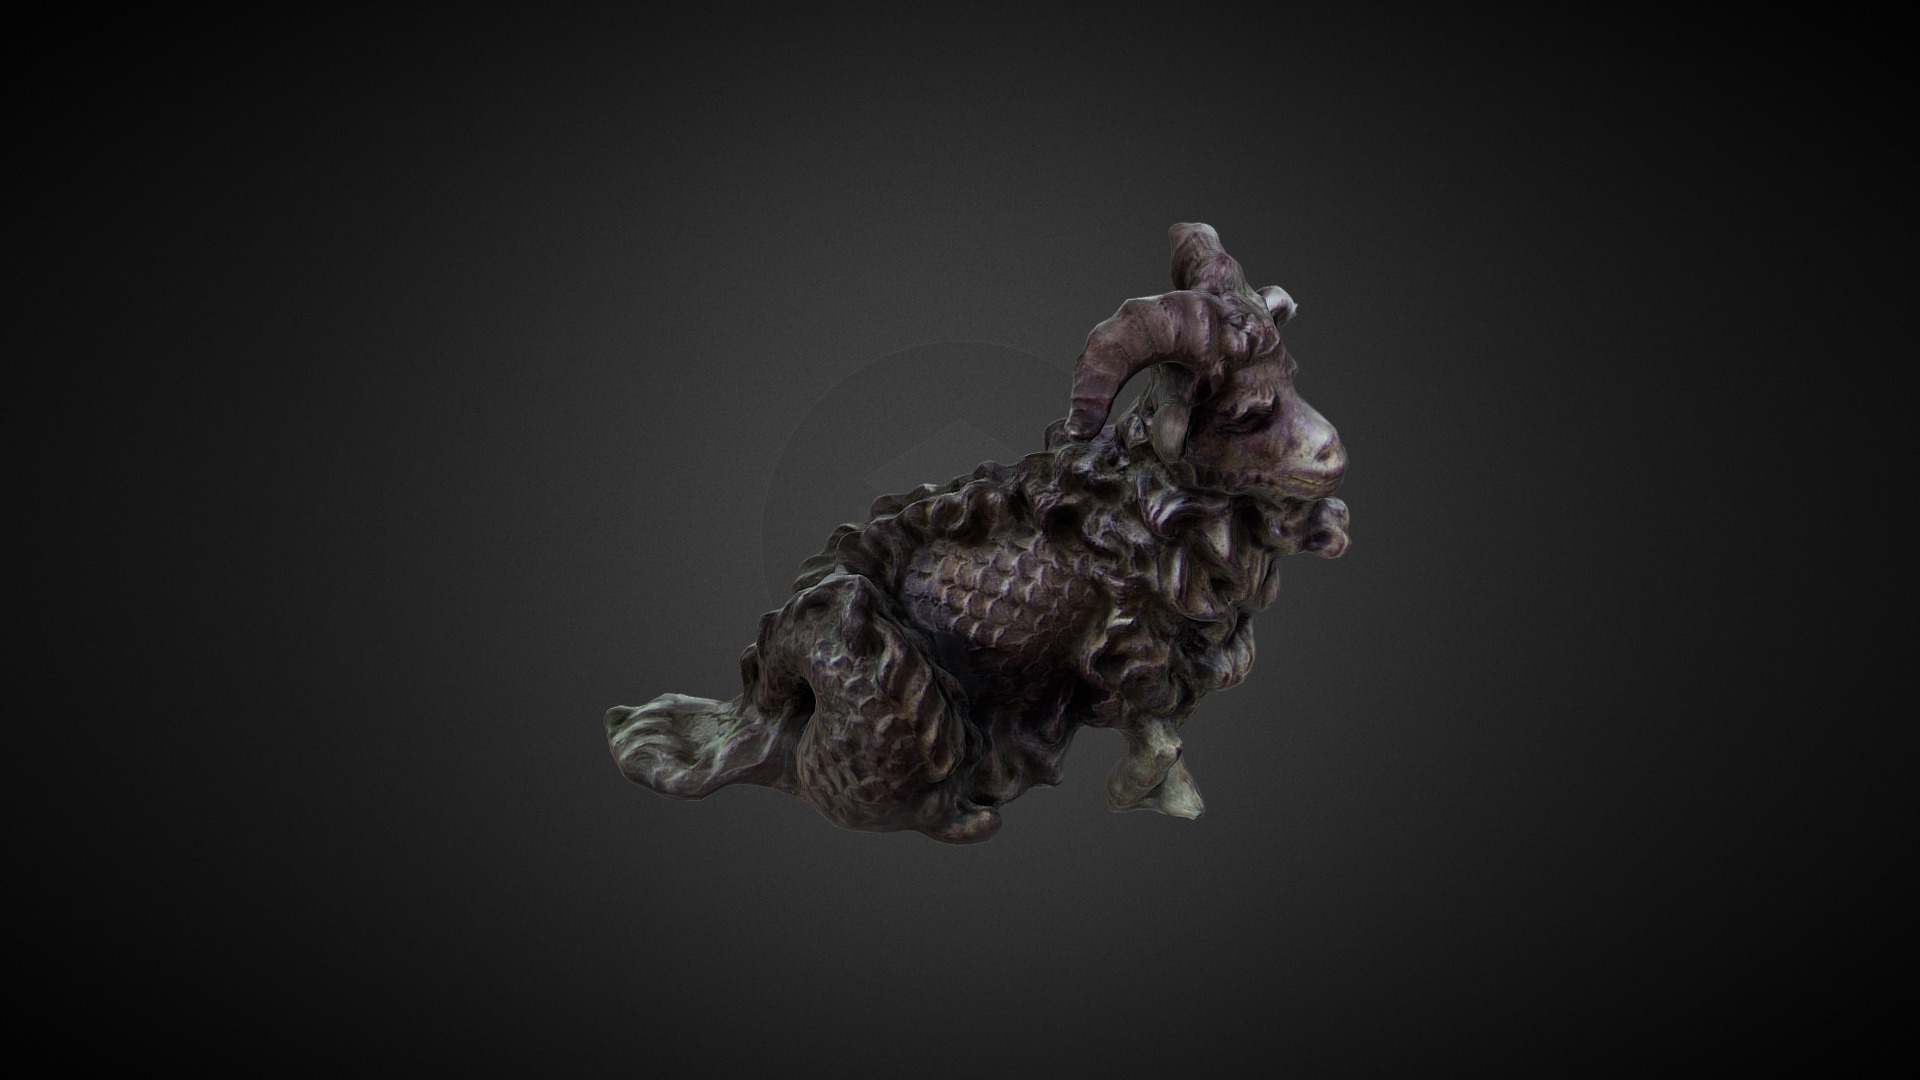 3D model Sheep asset - This is a 3D model of the Sheep asset. The 3D model is about a small animal with wings.